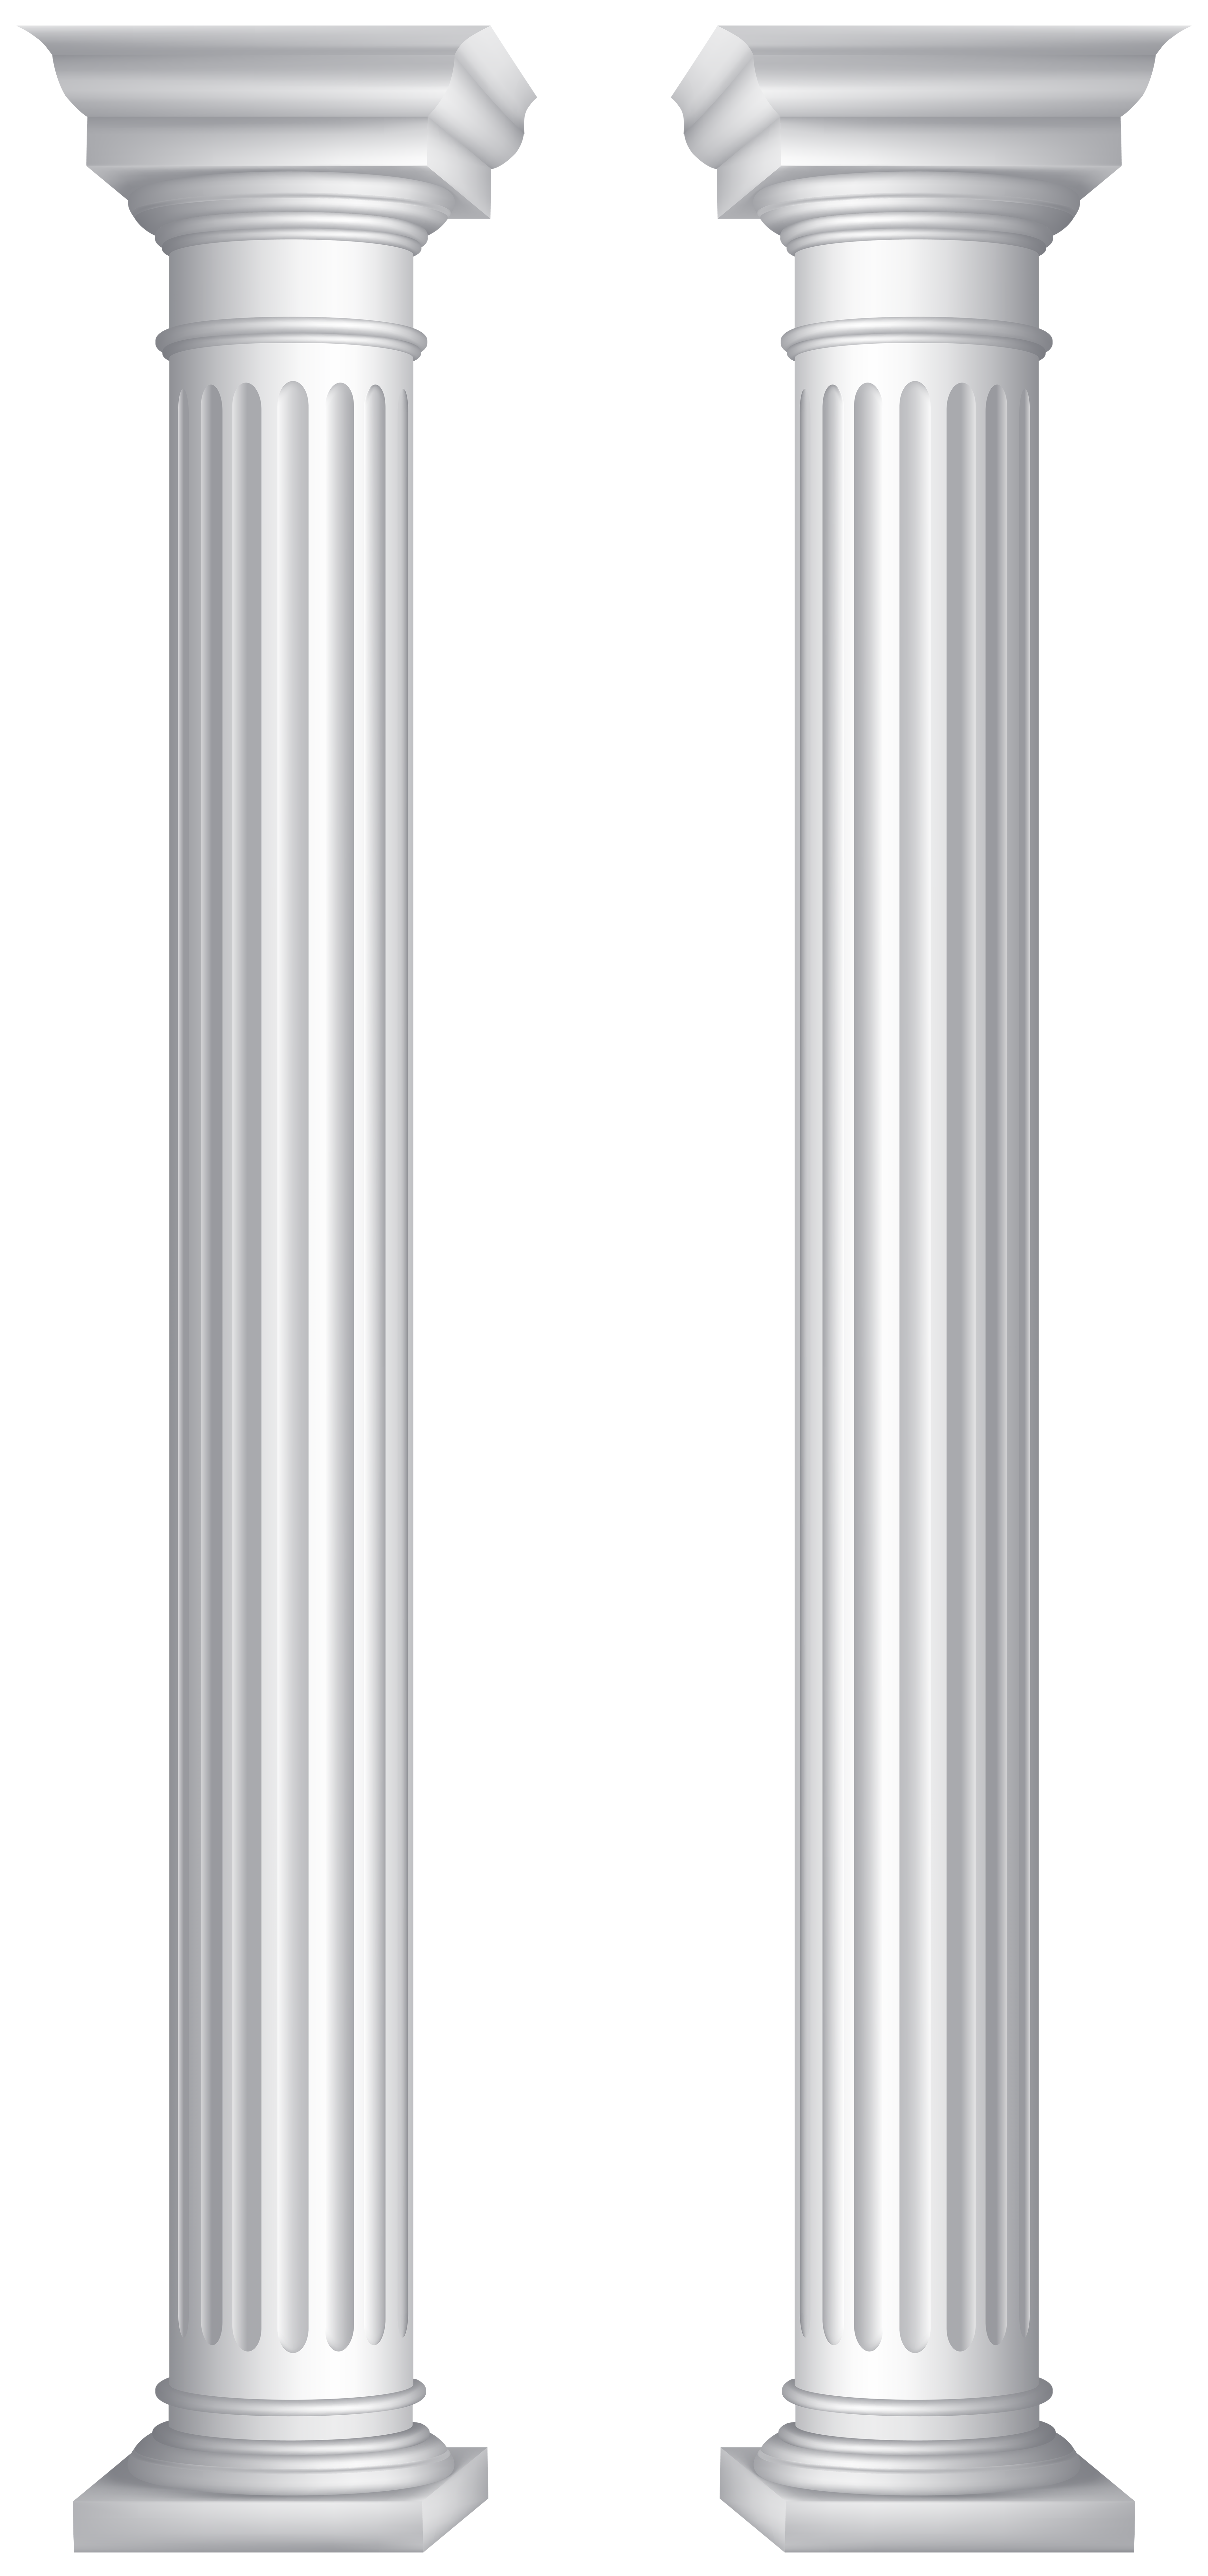 Columns PNG Clip Art Image | Gallery Yopriceville - High-Quality Images